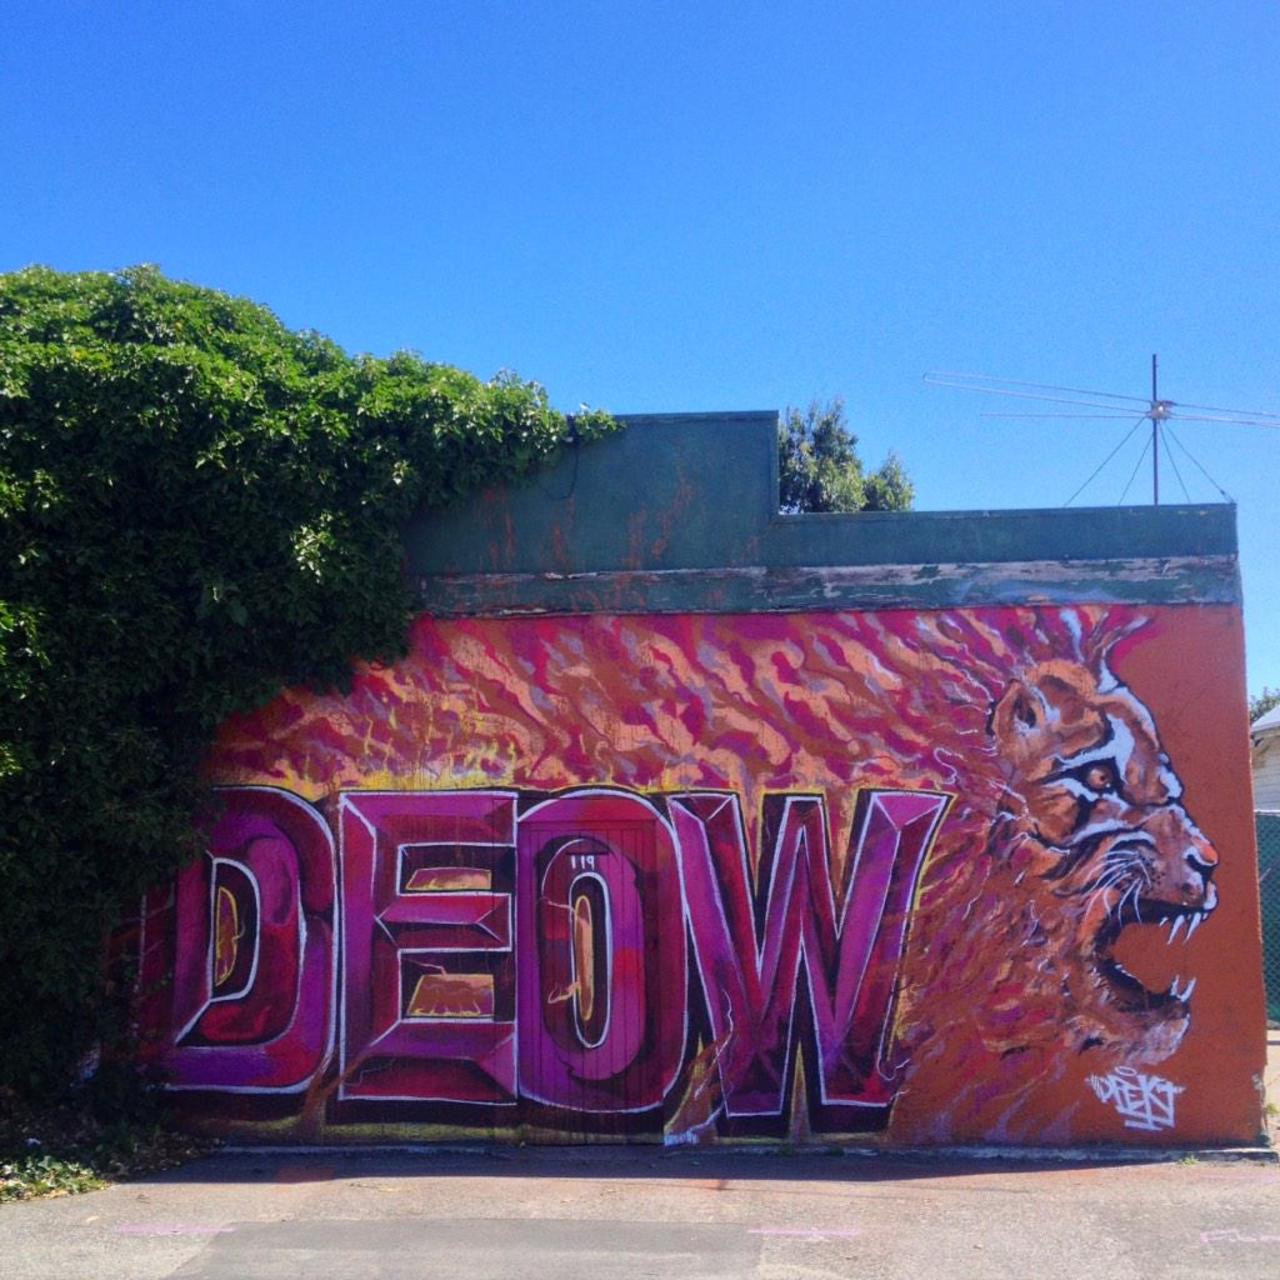 #deow in Invercargill the worlds southern most city. New Zealand #streetart #graffiti #mural http://t.co/0dRHK2QozW